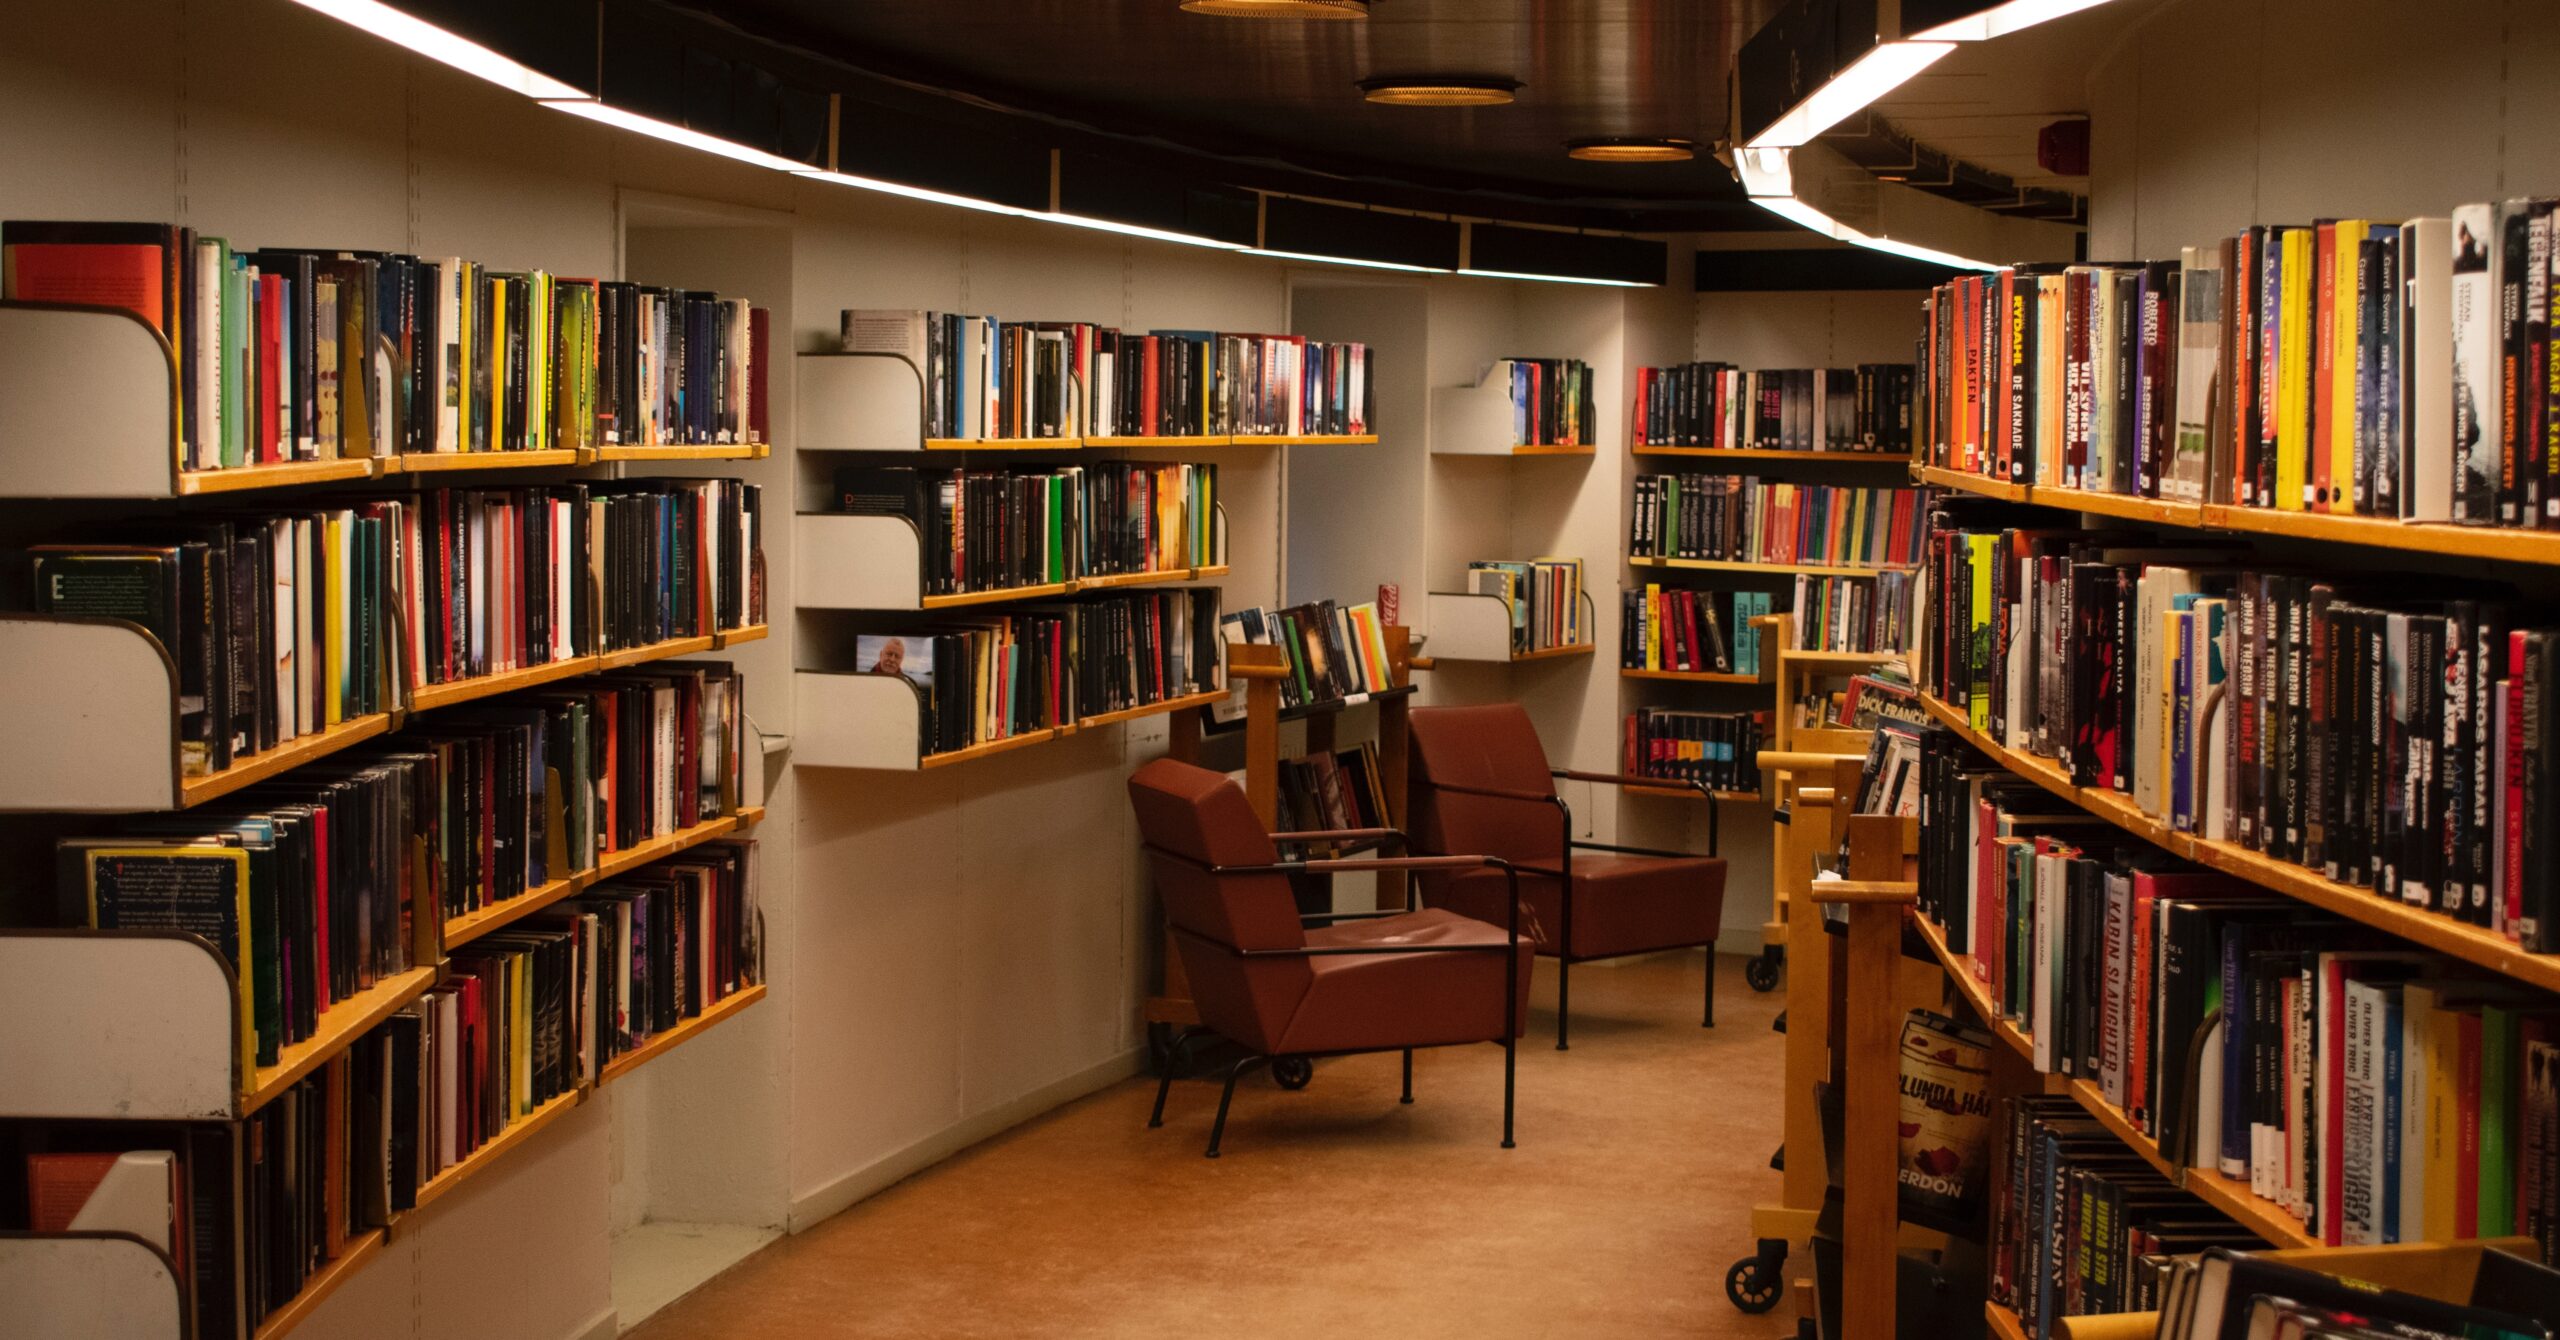 <p>More people than ever use libraries to access information resources and services, even as book loans decline. Learn how an online Master of Library and Information Science degree program can prepare you for excellent careers in this evolving field.</p>